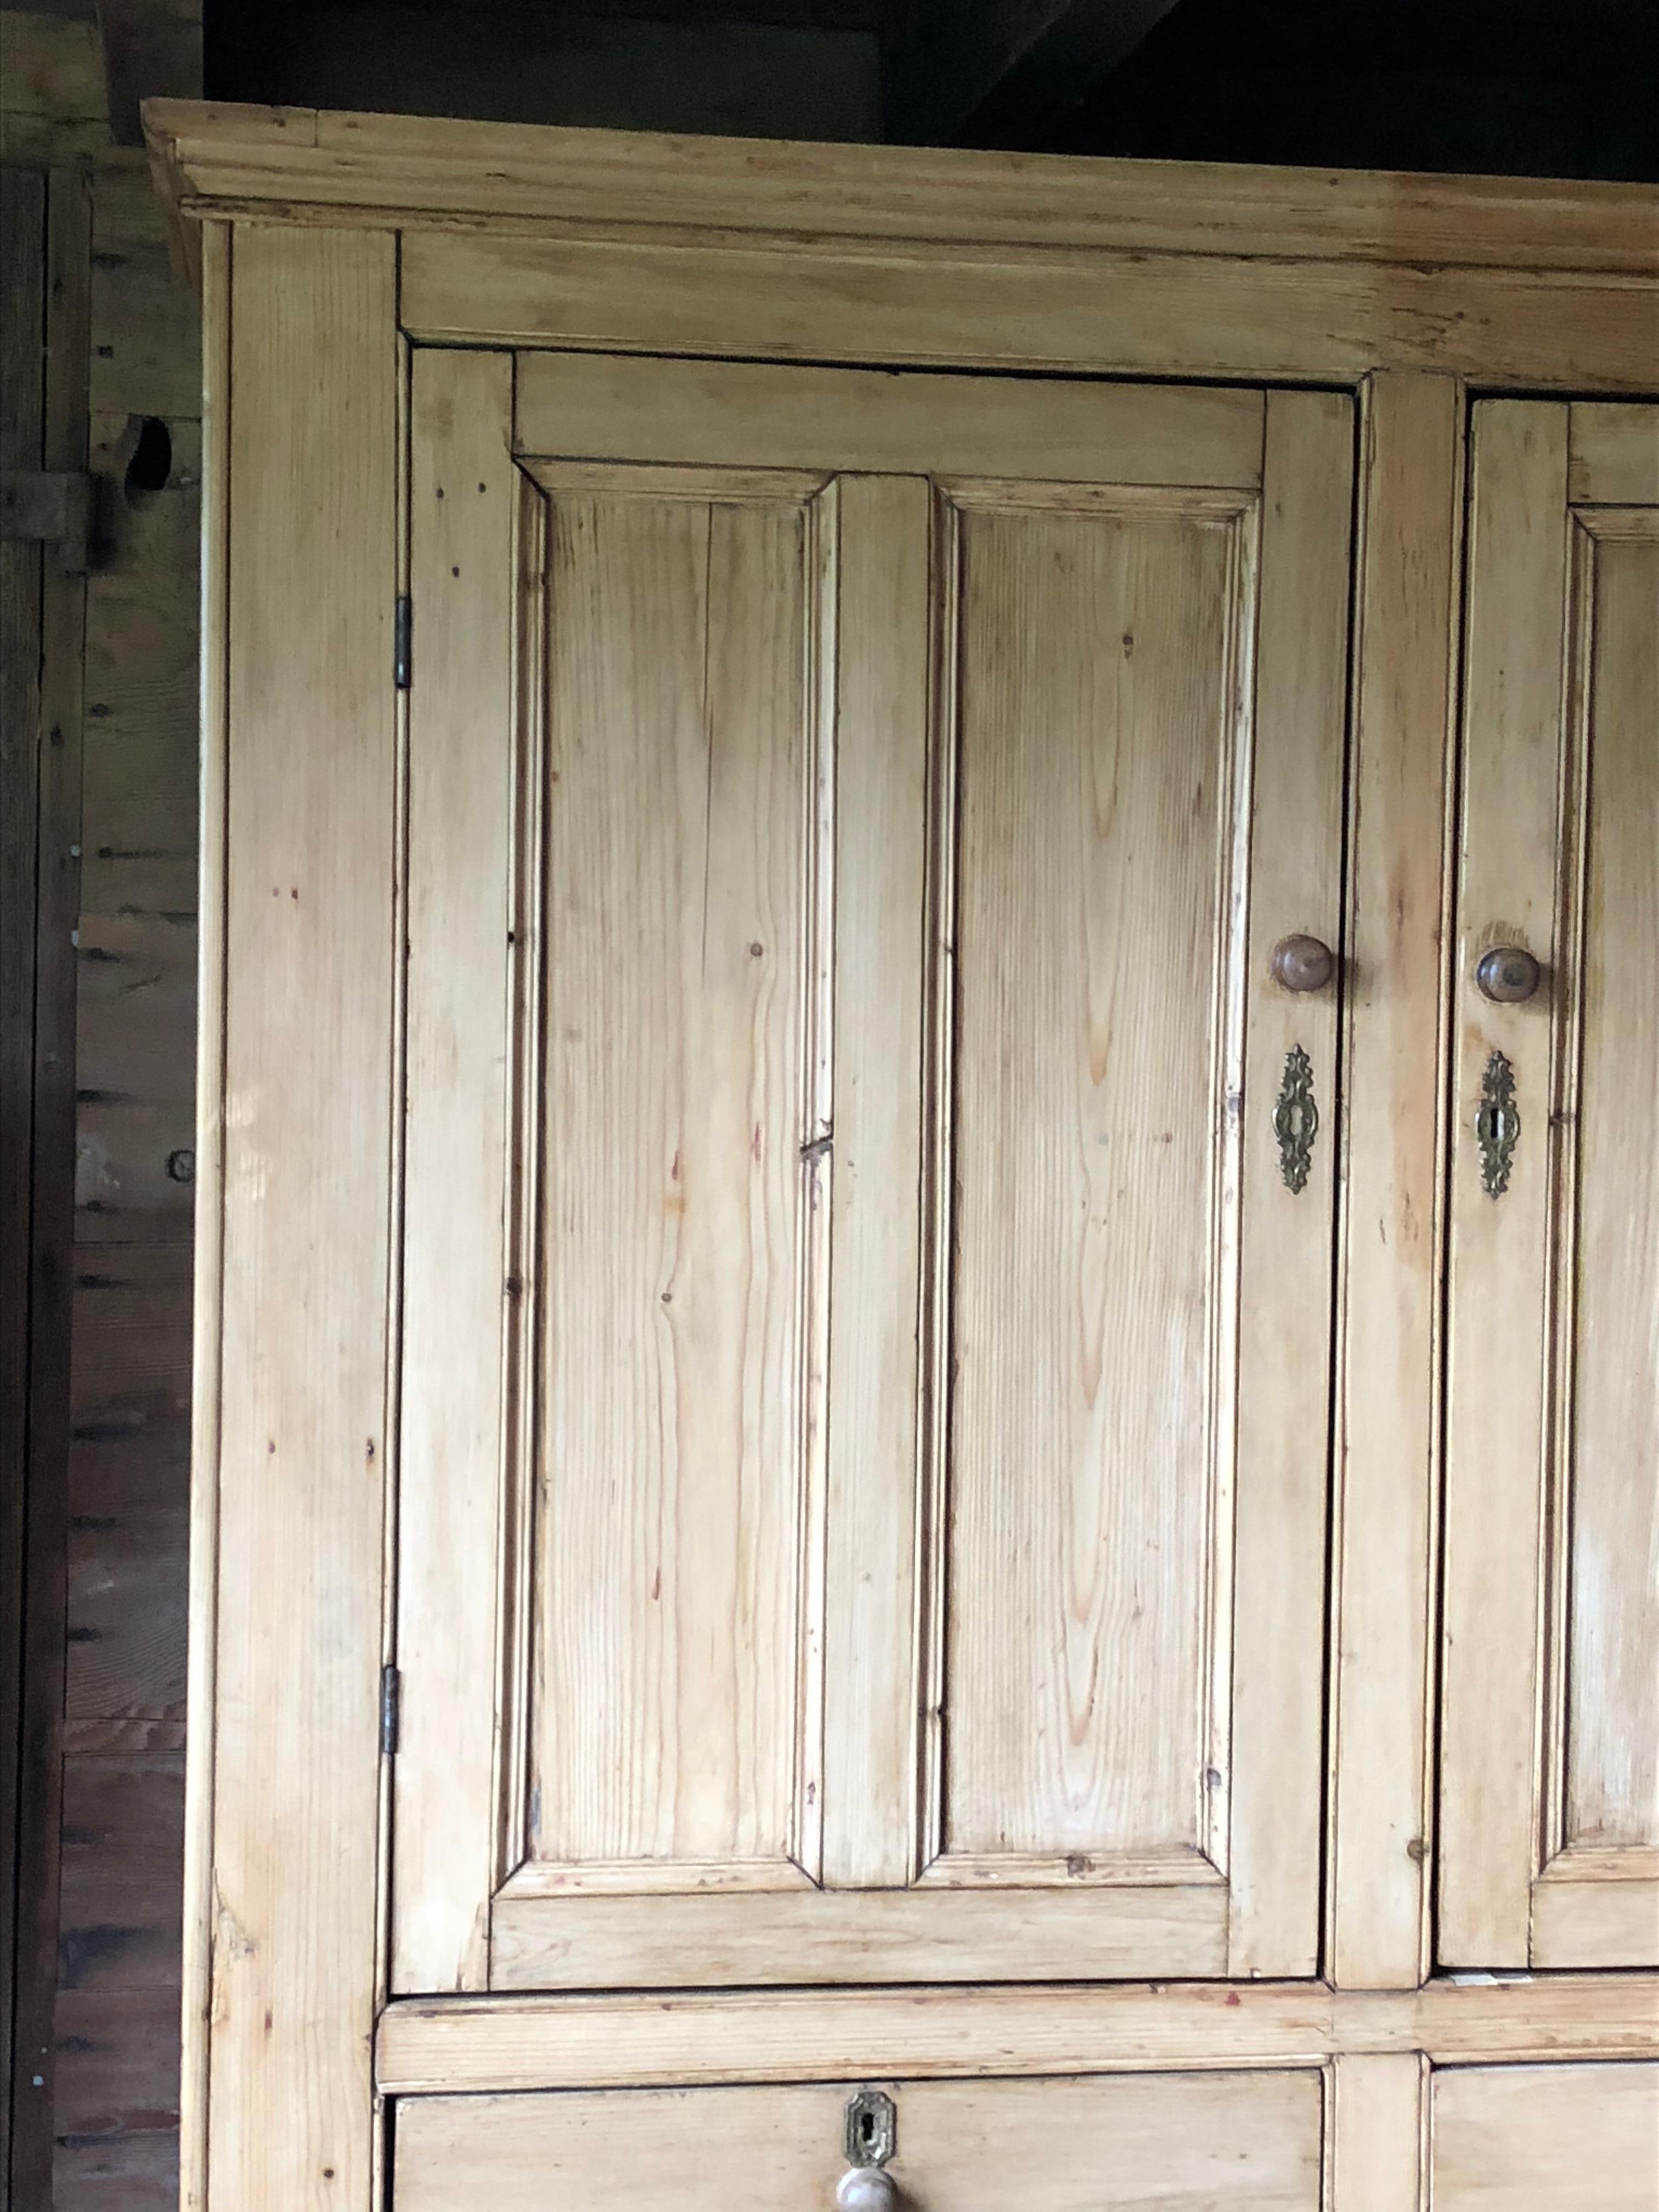 An English Country bleached pine cupboard or linen press, with 4 large cabinet paneled doors and 2 drawers, circa 1840.